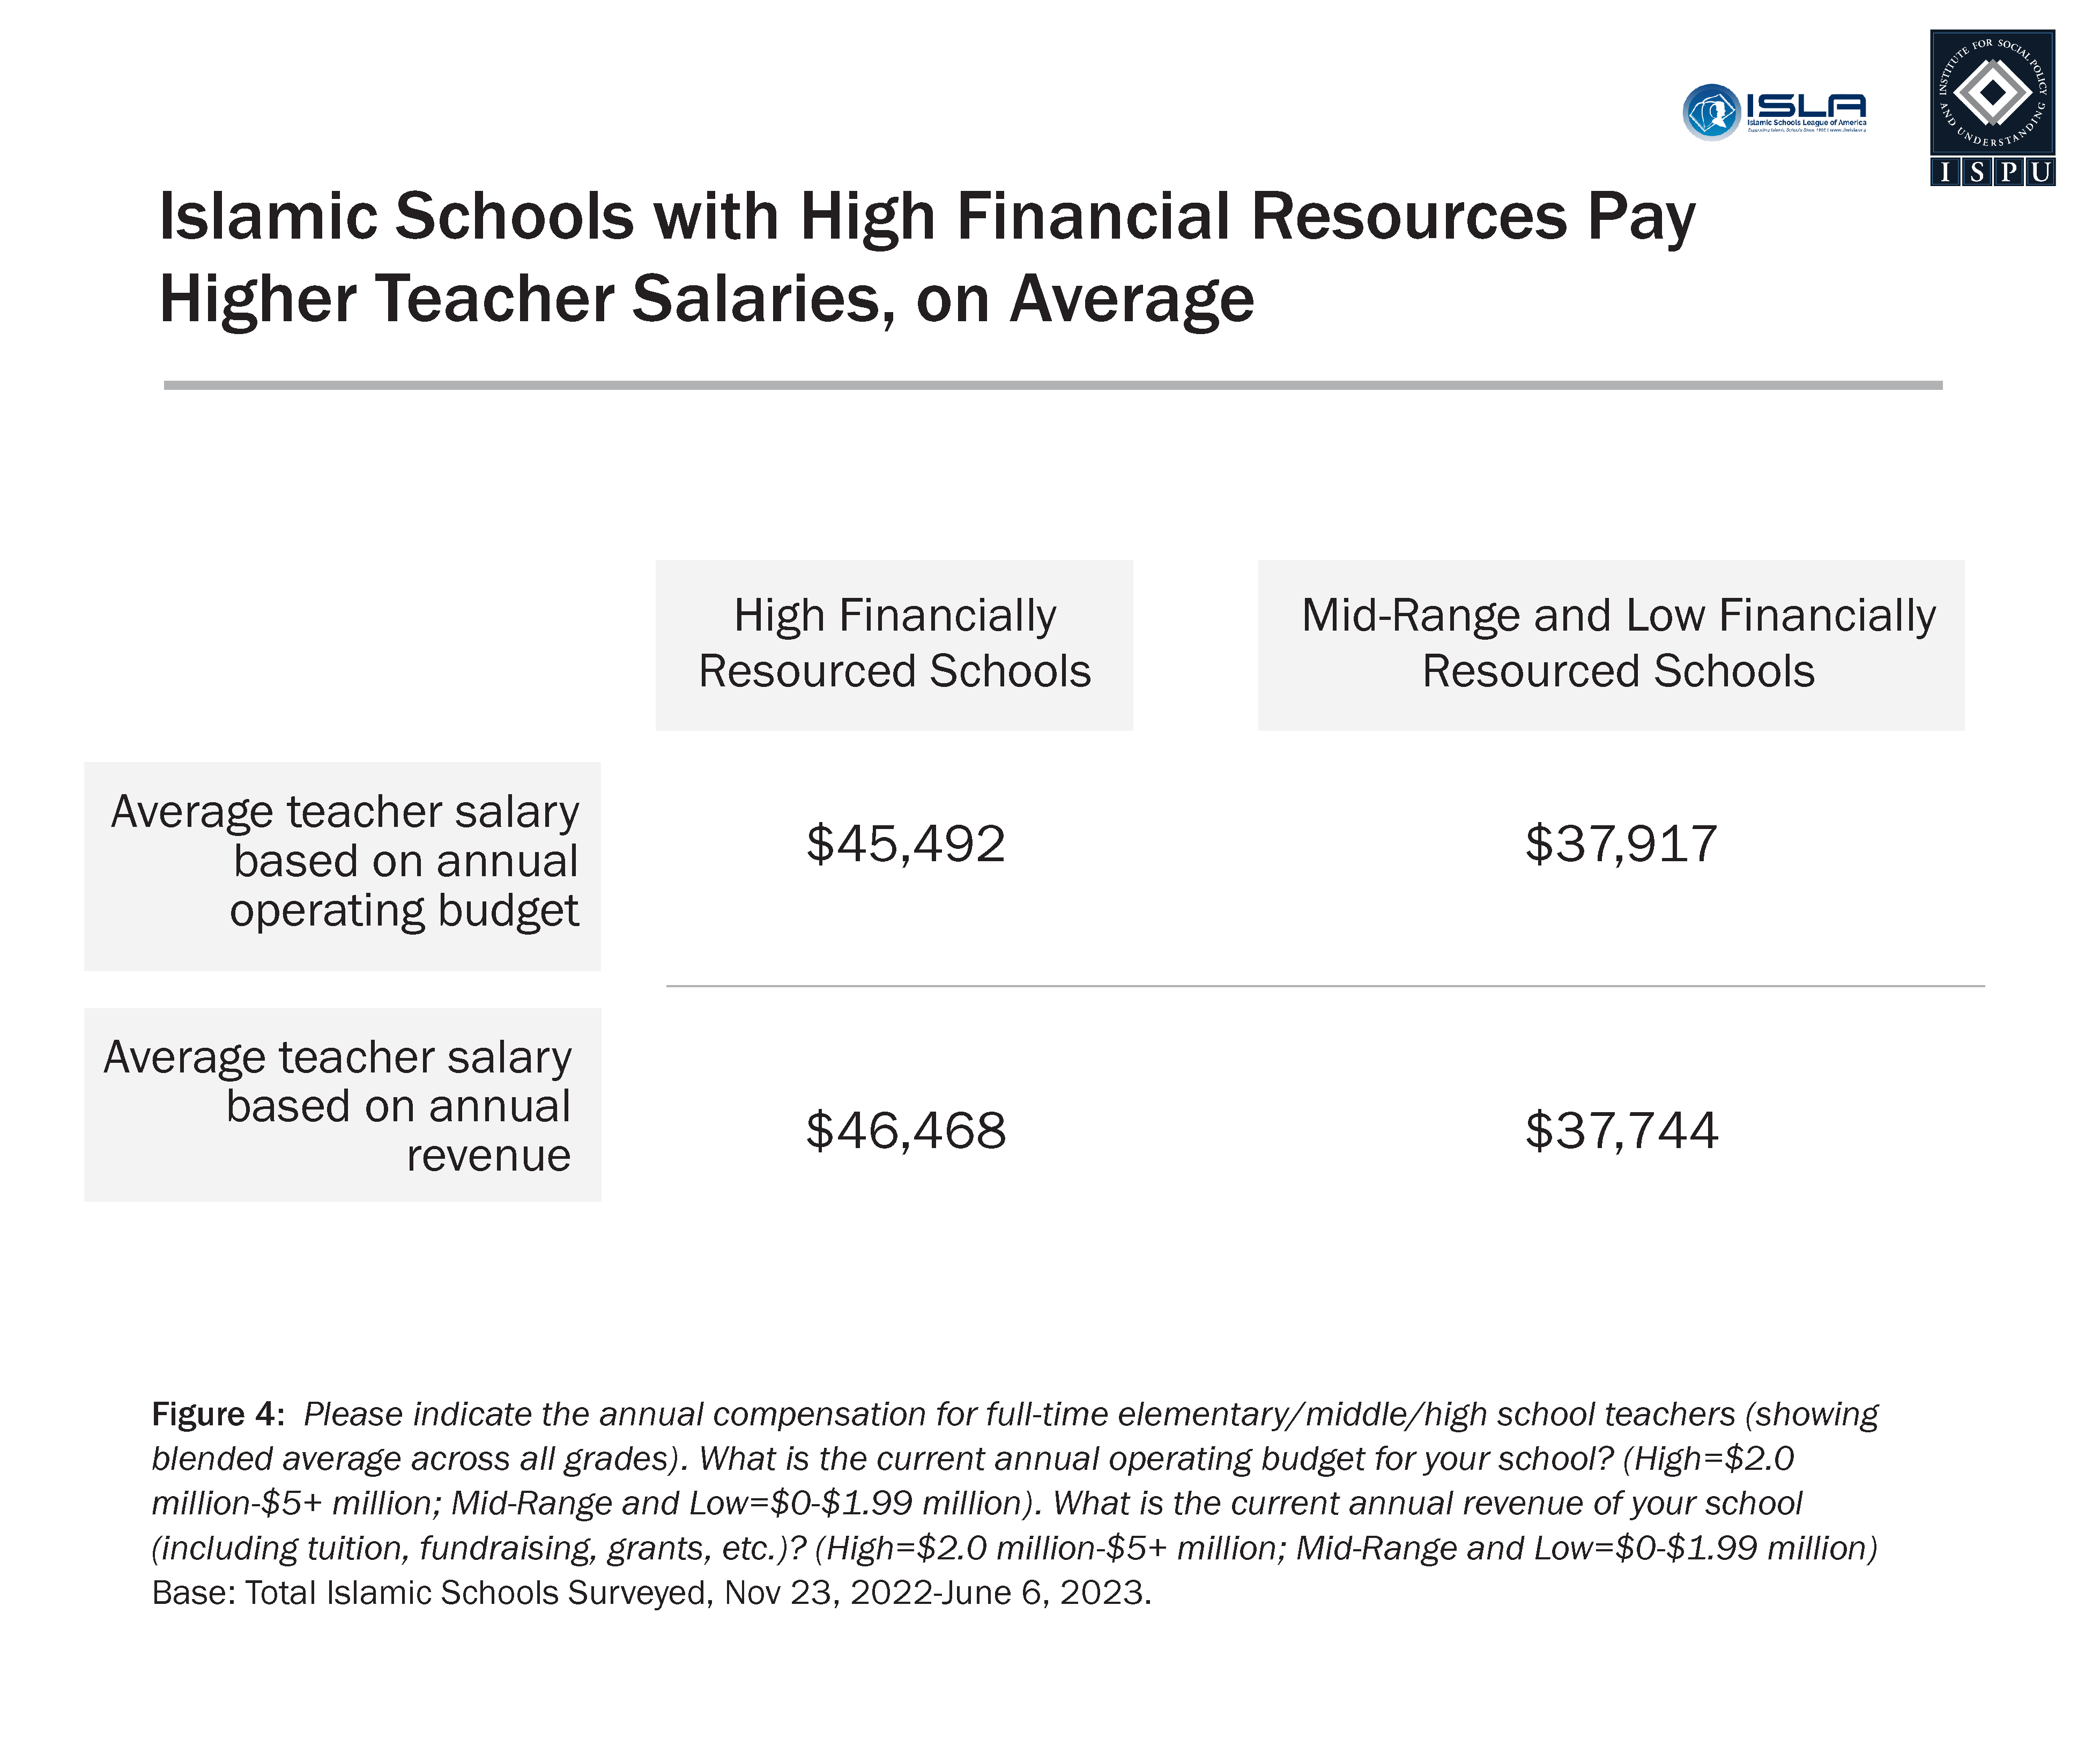 A table showing the average teacher salary for high financially resourced schools vs. mid-range and low financially resourced schools by operating budget, revenue, and tuition.